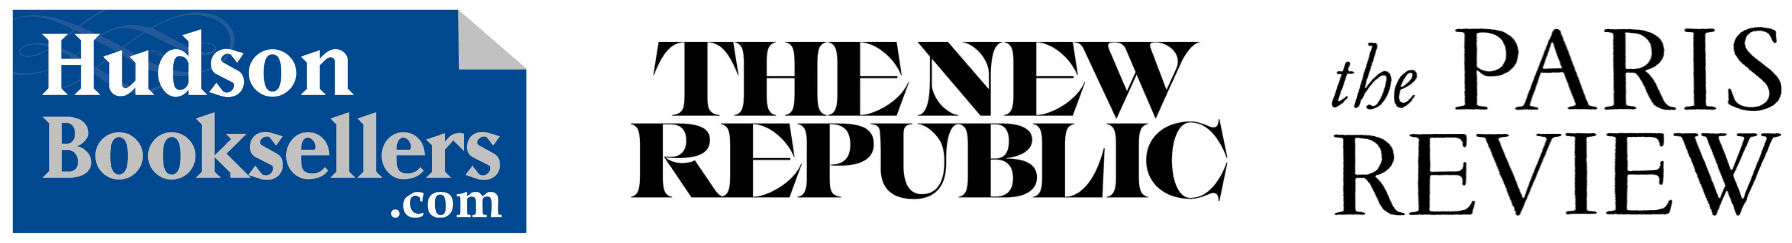 Logos of media partners: Hudson Booksellers, The New Republic, and The Paris Review